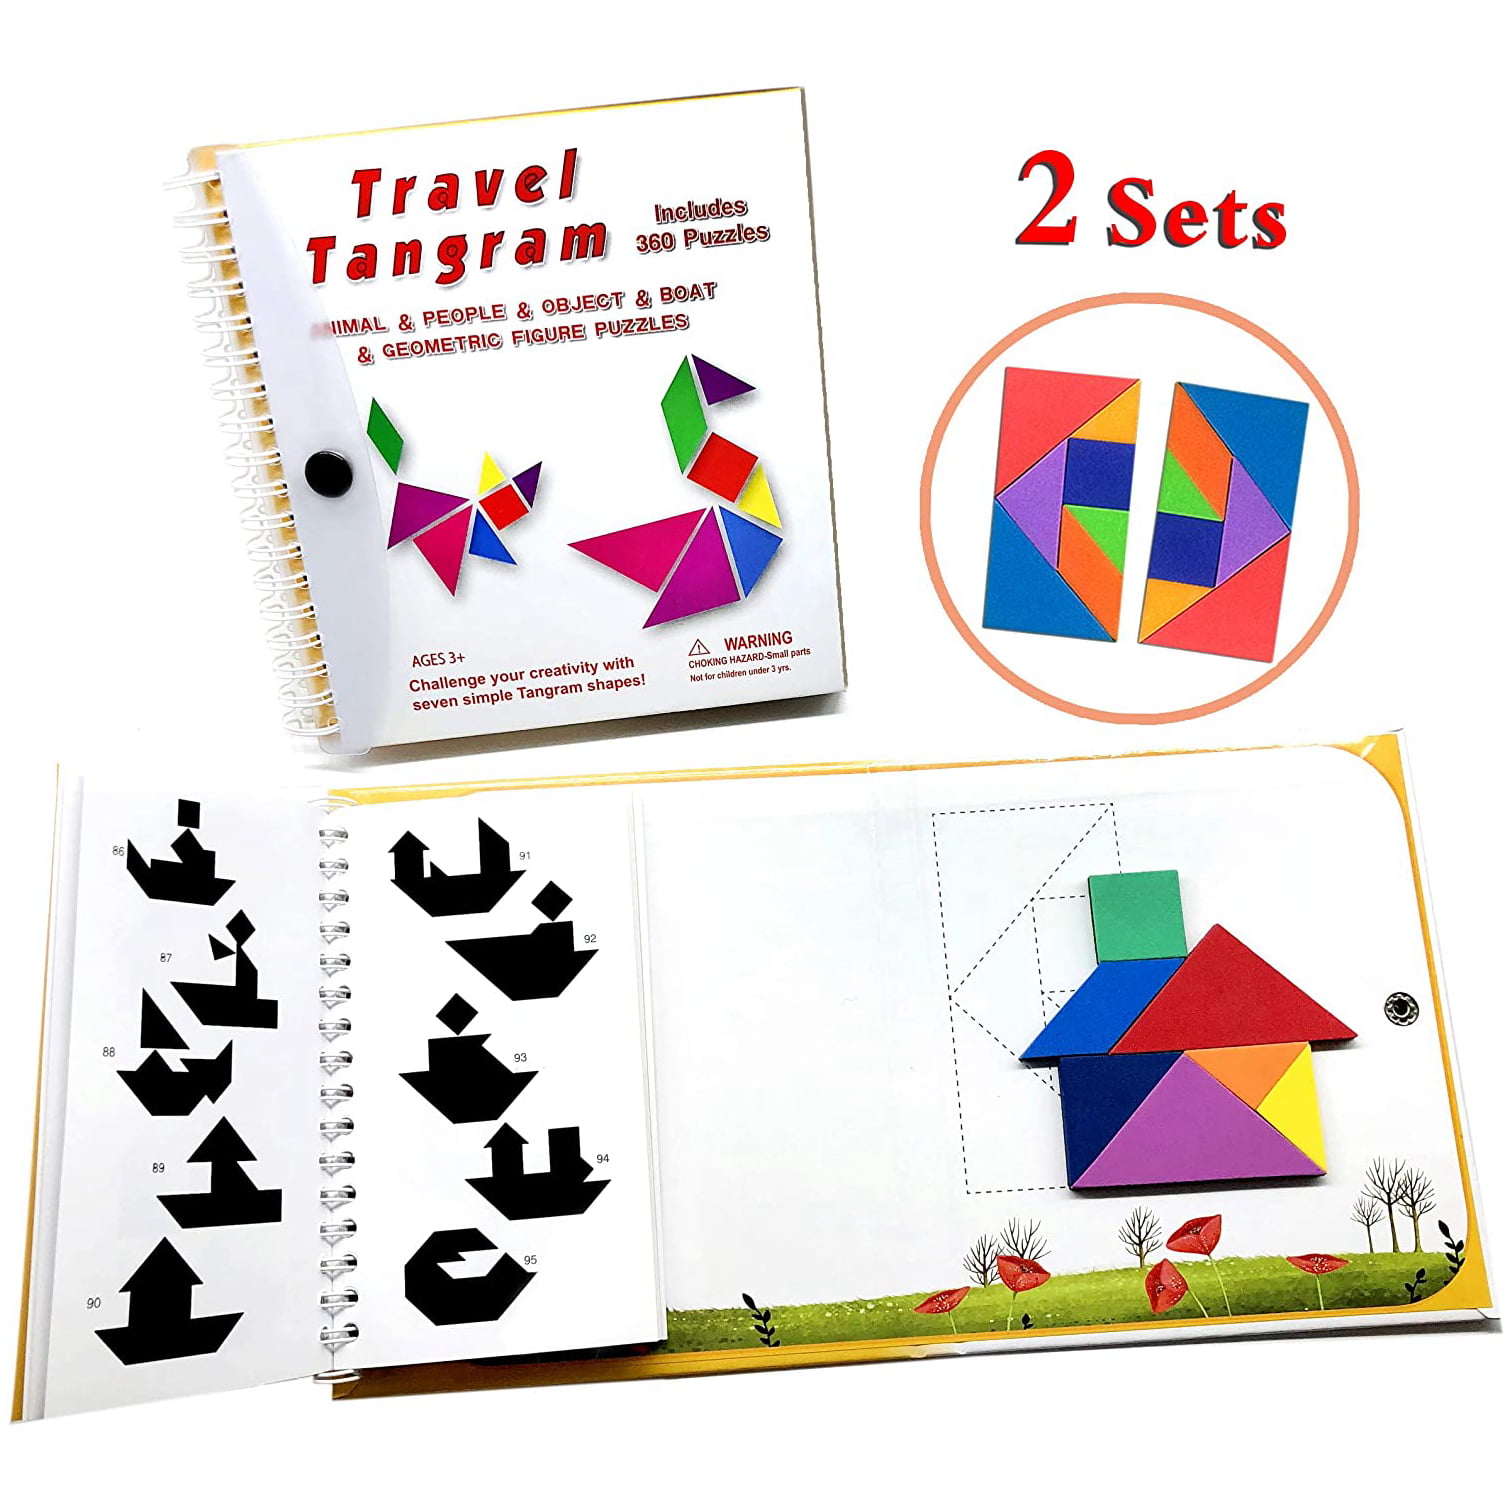 Tangram Wooden Puzzle Geometry Game with 48 Silhouette Tangrams Challenge Booklet 